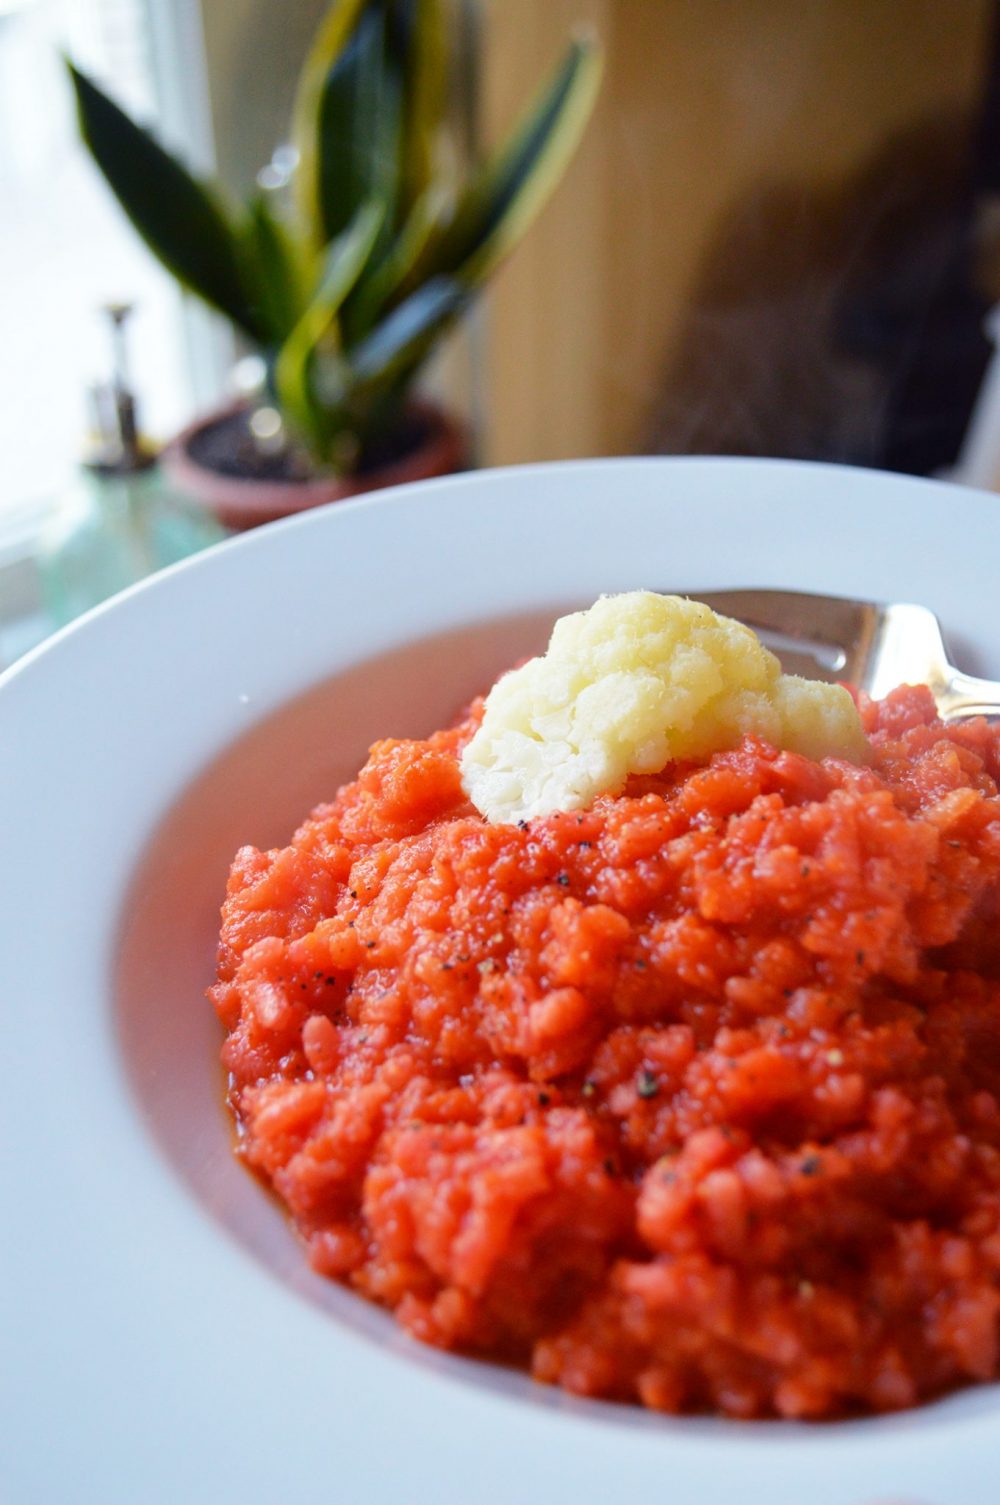 Easy Root Vegetable Risotto Recipe